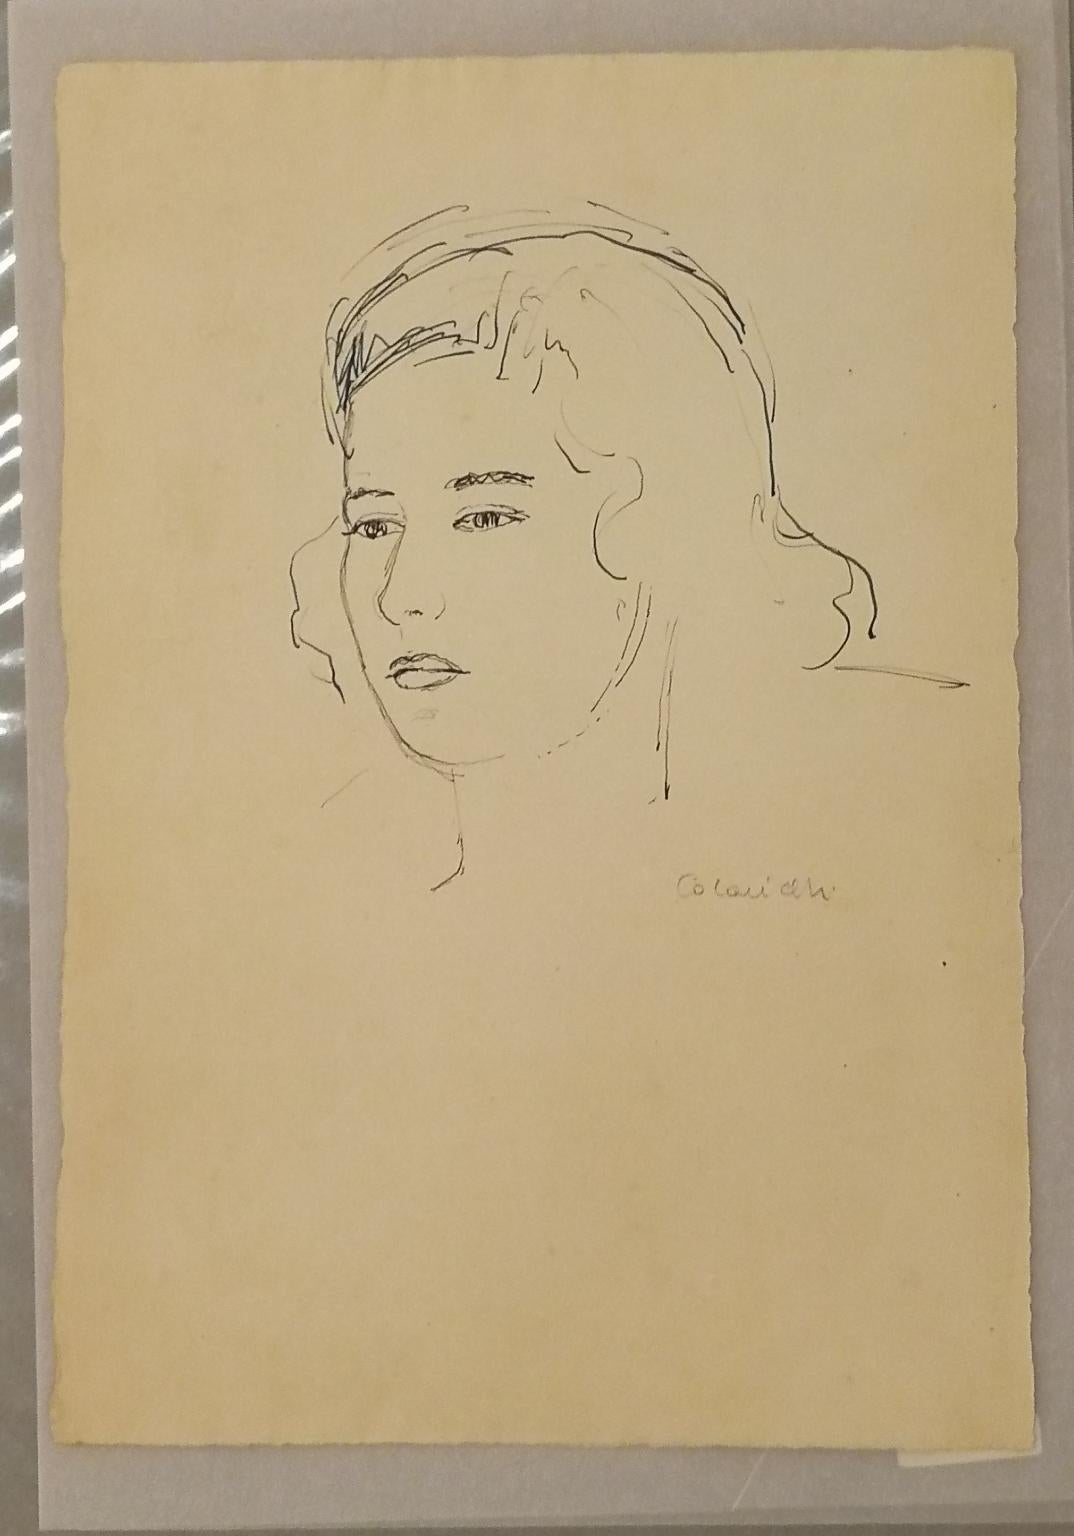 The drawing, signed at the right Colacicchi, is a pen and pencil on paper portrait of a gloomy lady with vaporous hair.
It belongs to the 1950s during the time that Colacicchi had a school for students from abroad.